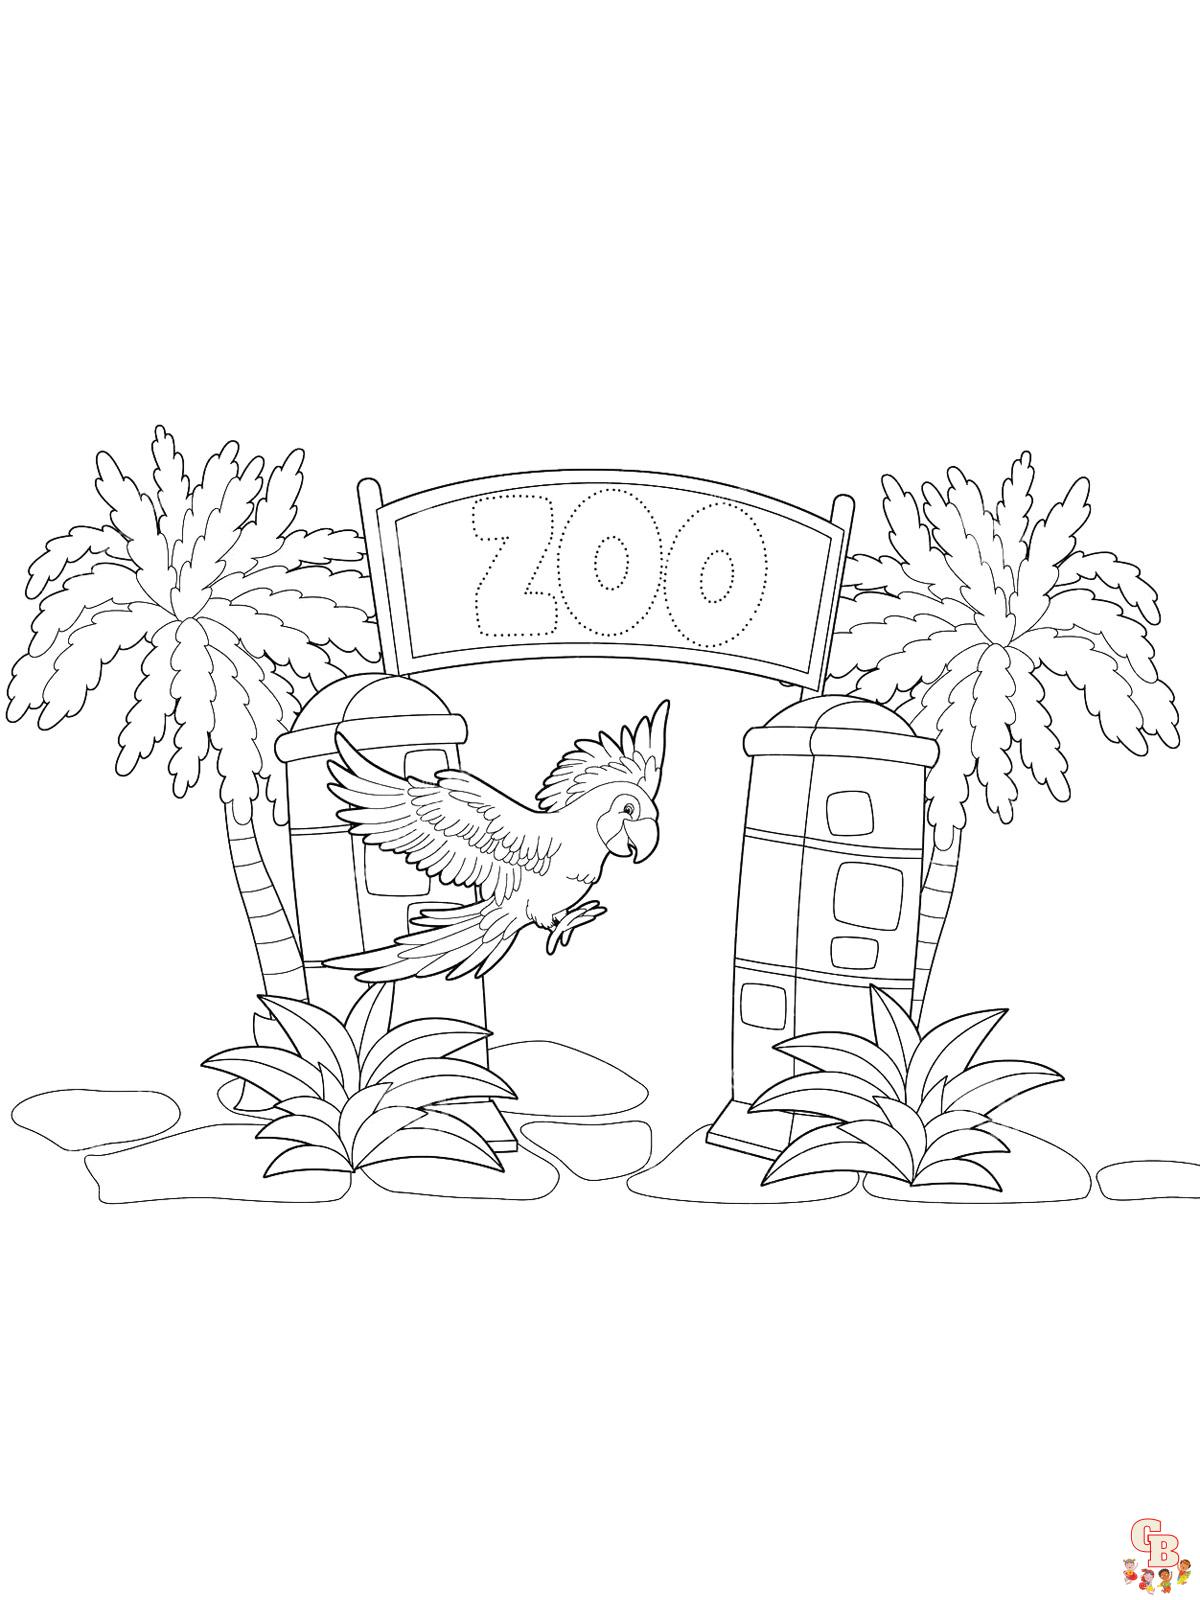 Zoo Coloring Pages 8